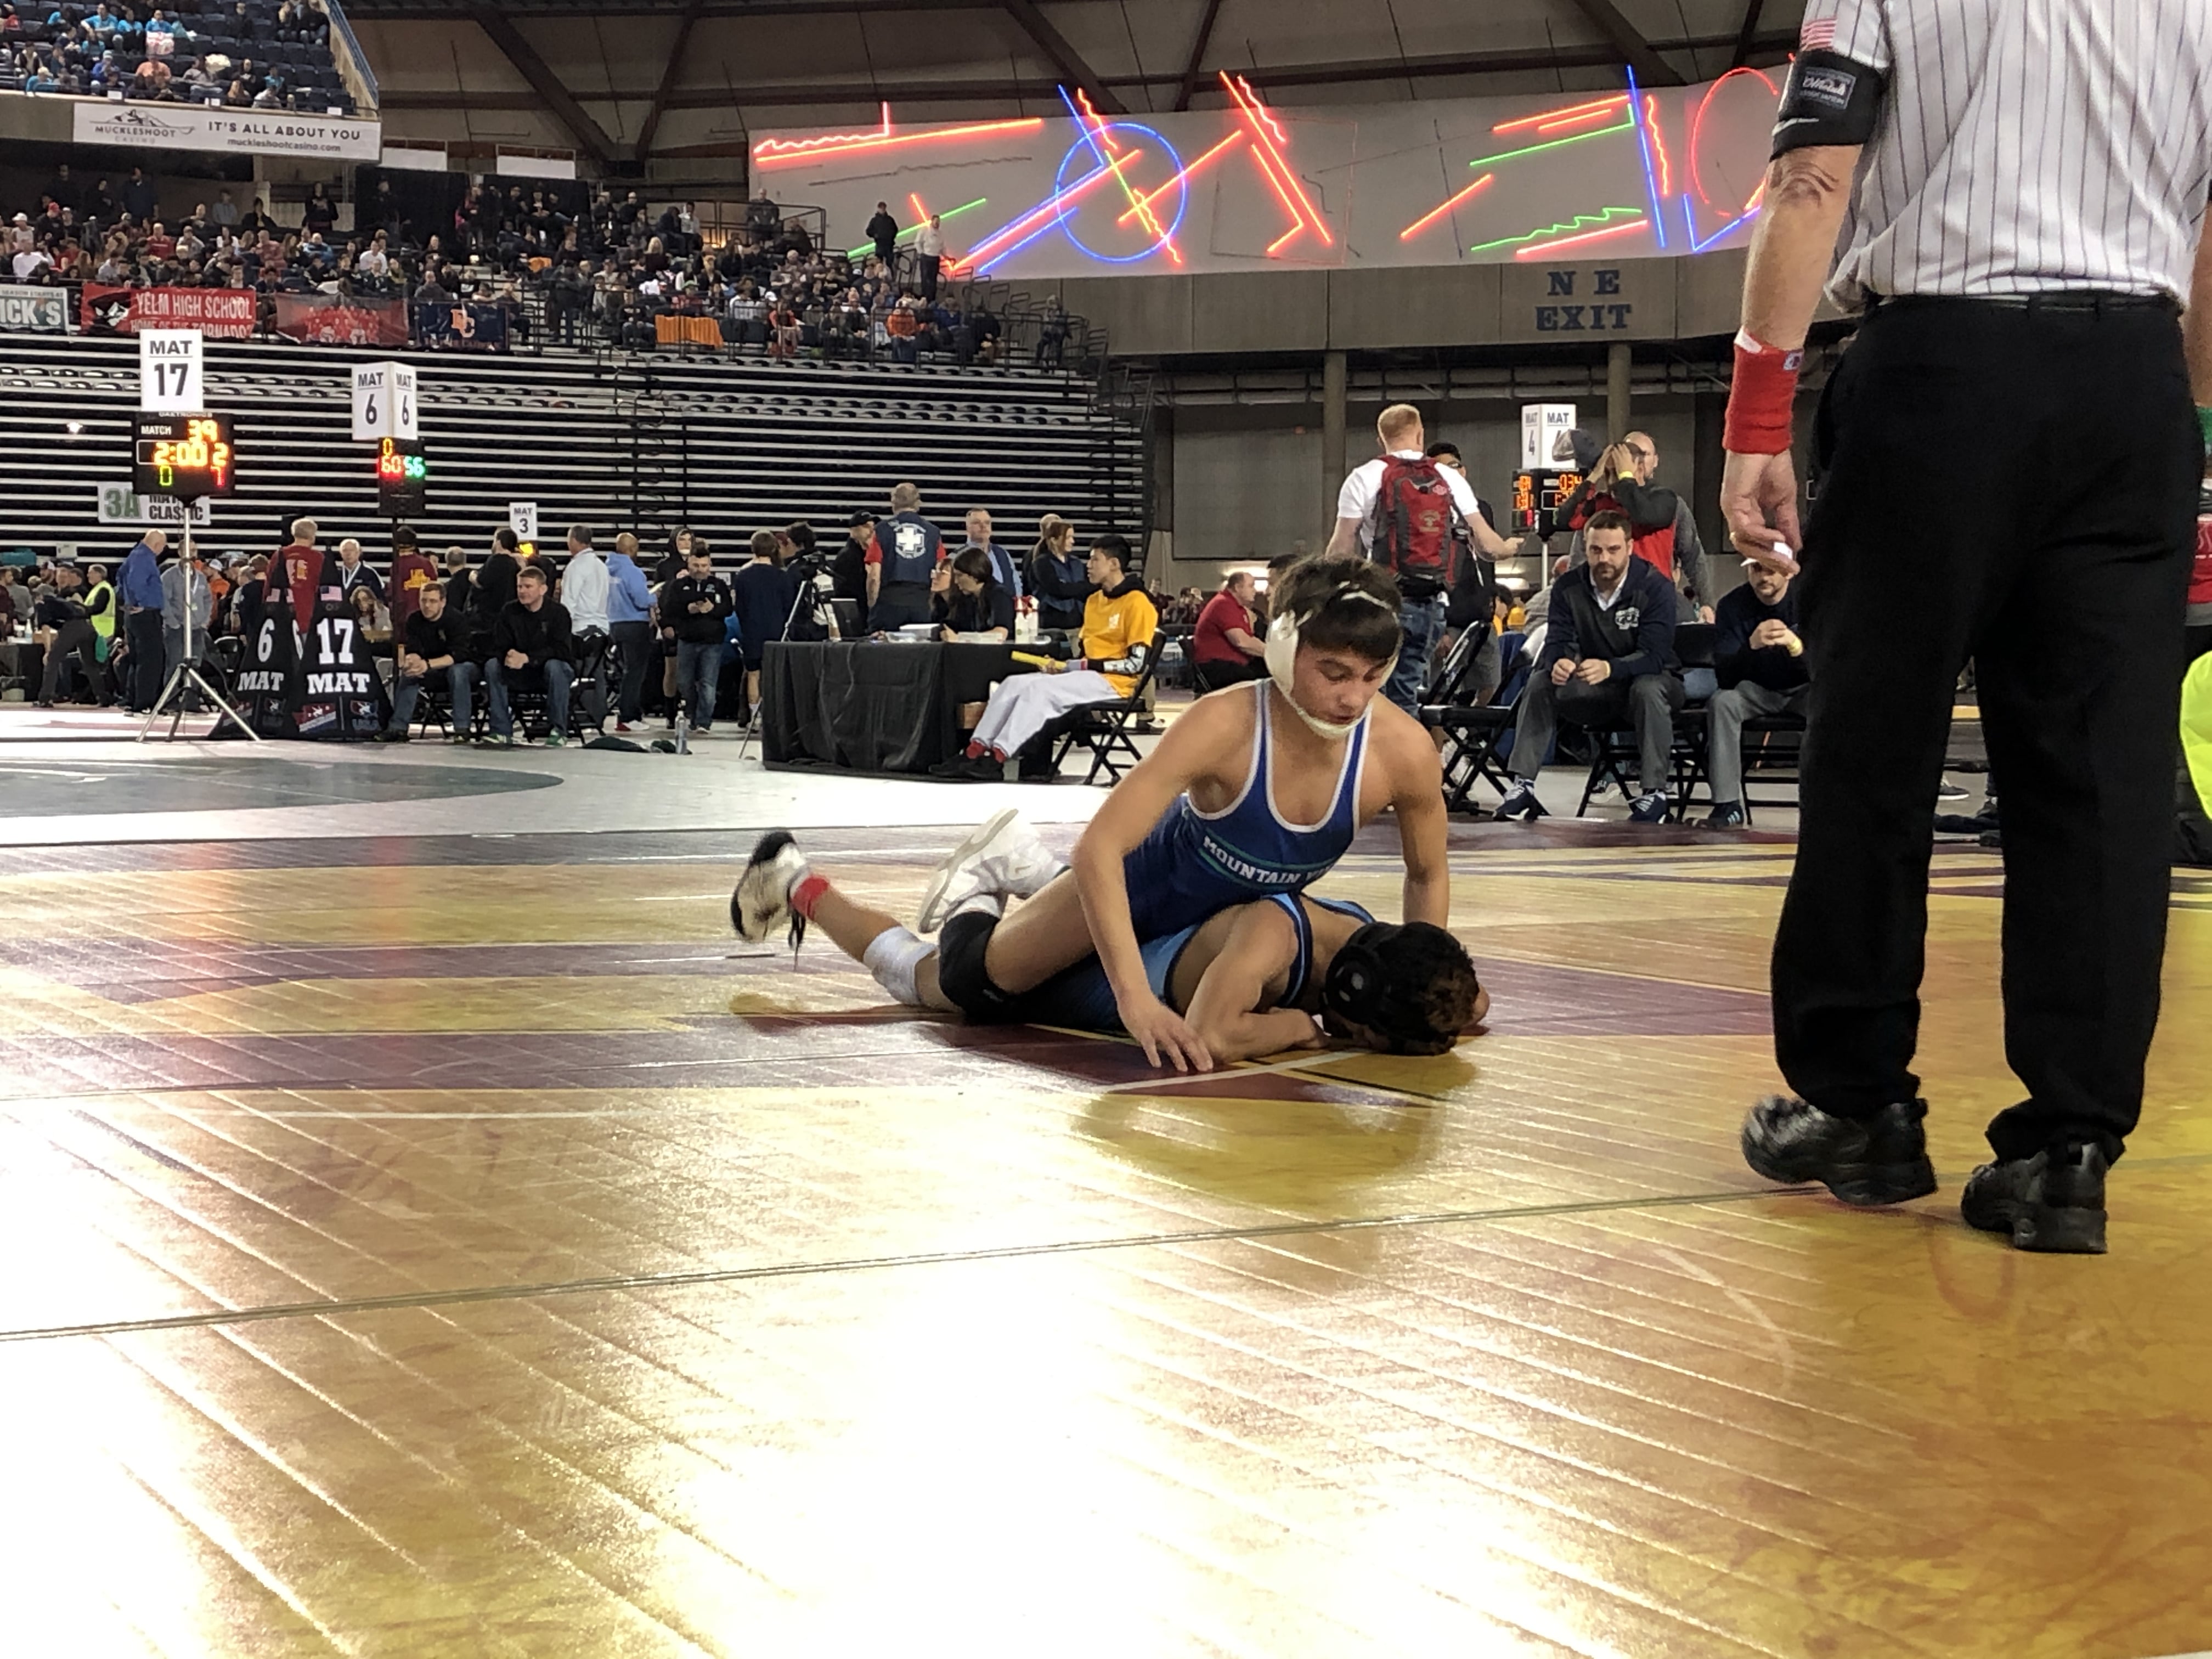 Mountain View's Noah Messman controls his opponent in a first-round match at the Mat Classic state wrestling championships in Tacoma. Messman is one of five Thunder wrestlers to advance to Saturday's quarterfinals.